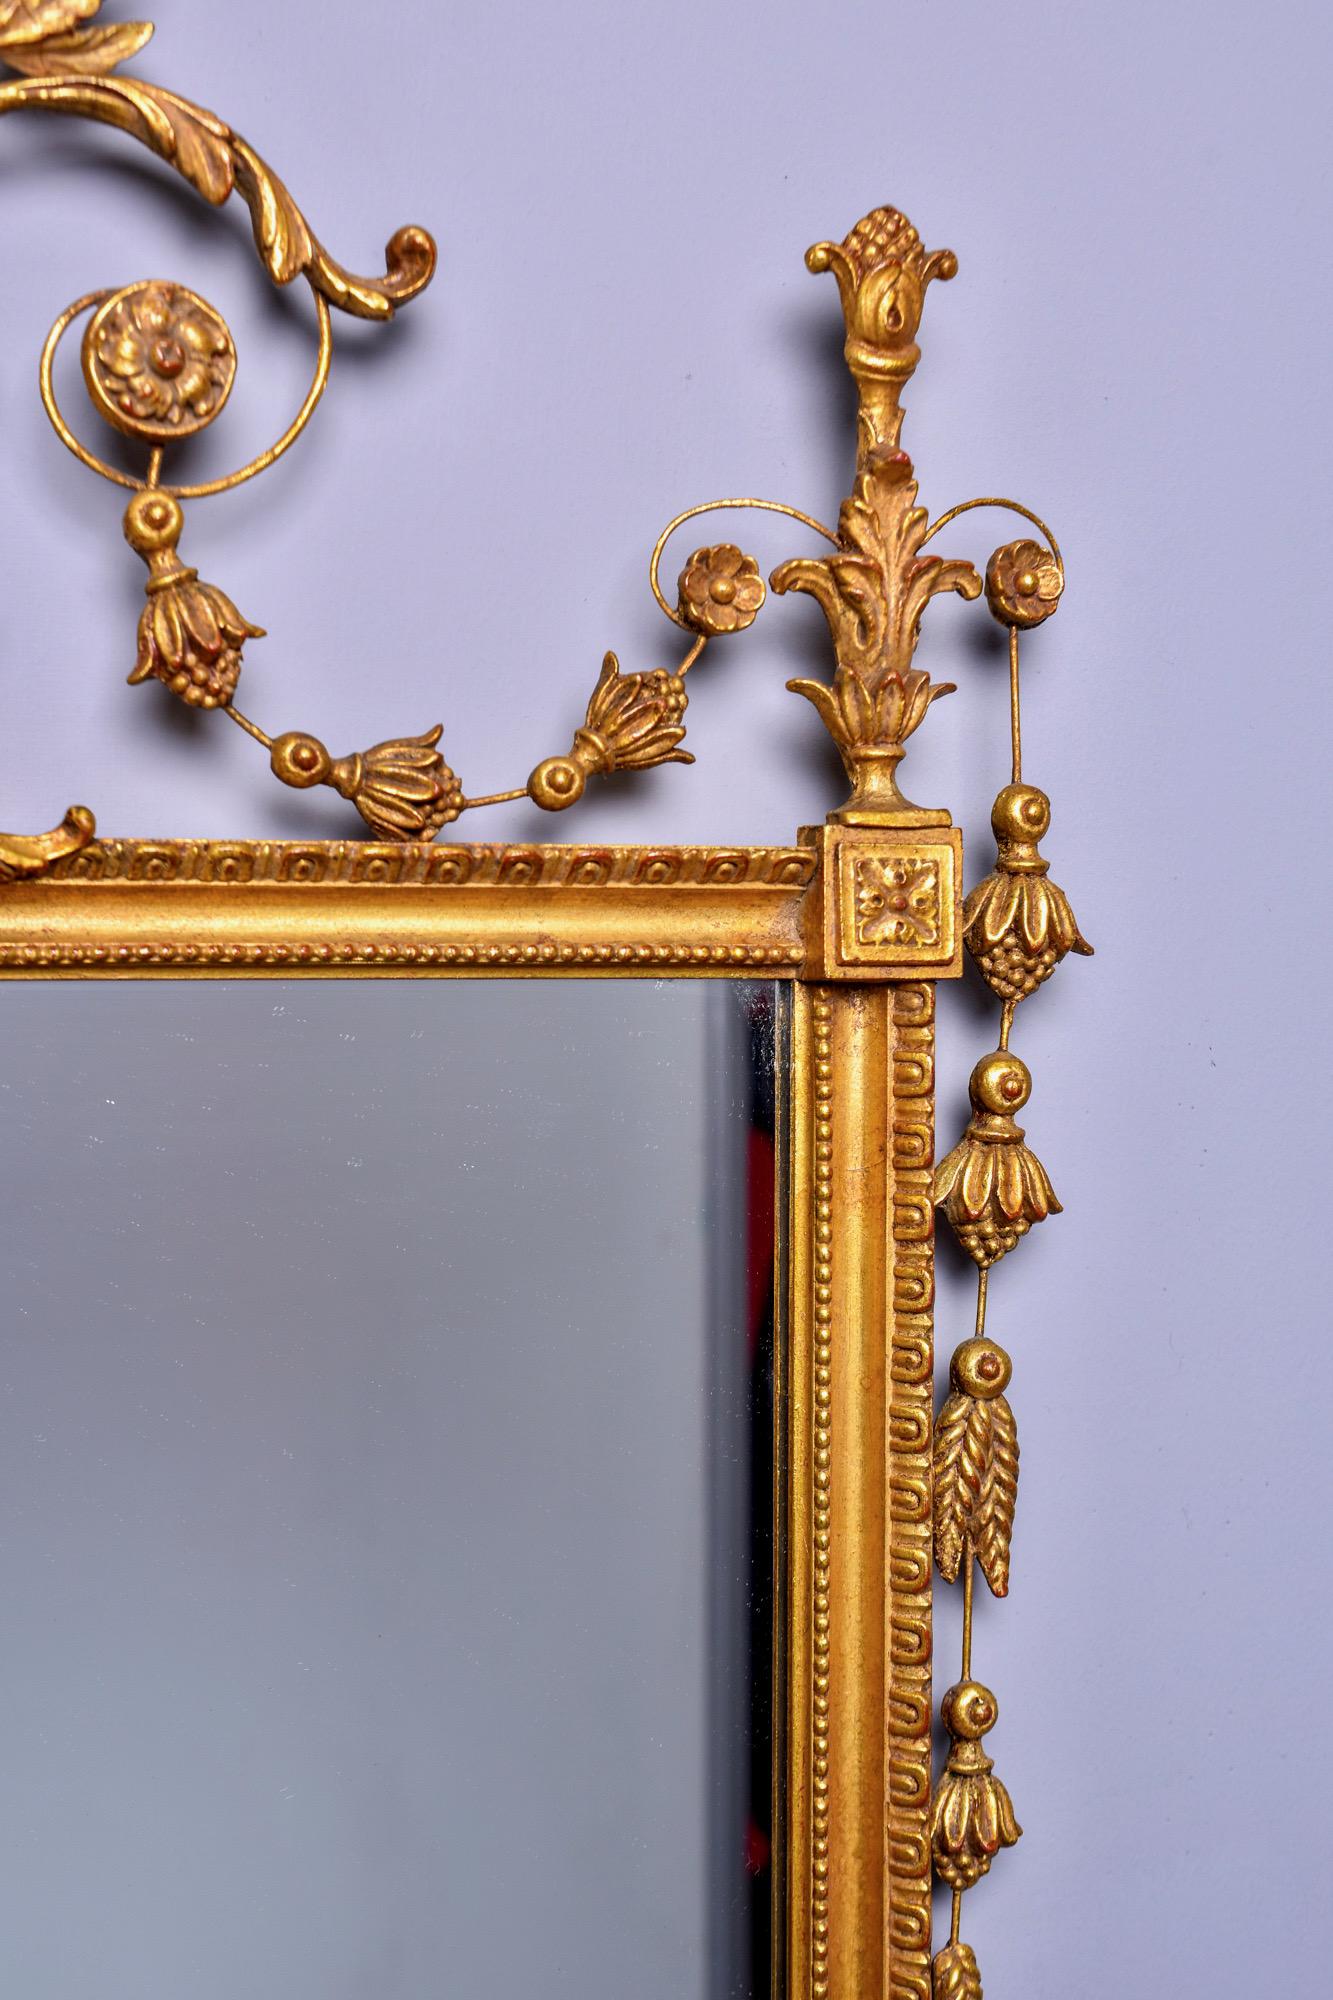 20th Century Vintage Giltwood Mirror with Fancy Crest